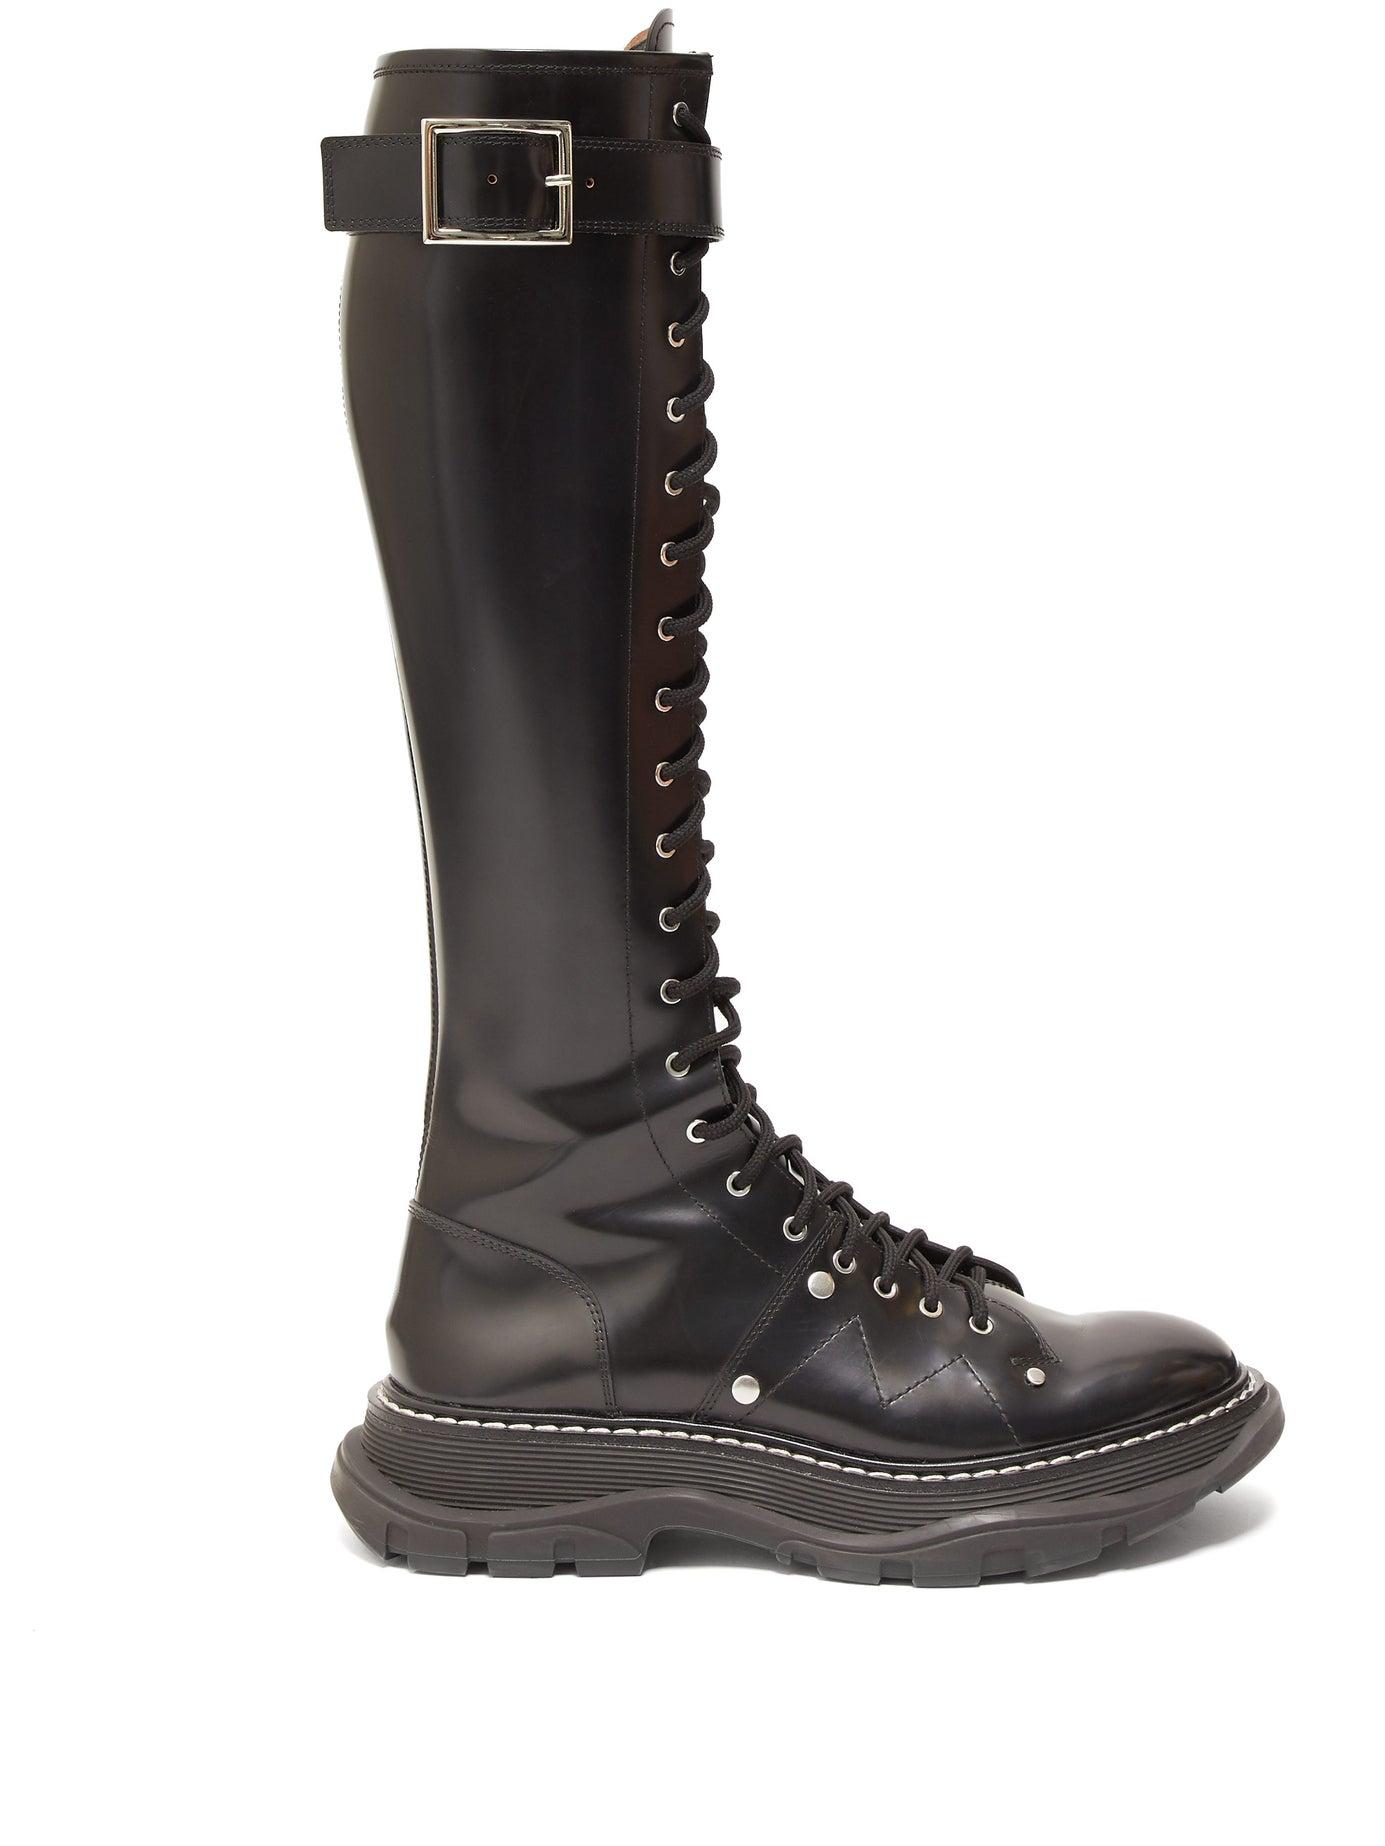 Alexander McQueen Lace-up Patent-leather Military Boots in Black - Lyst